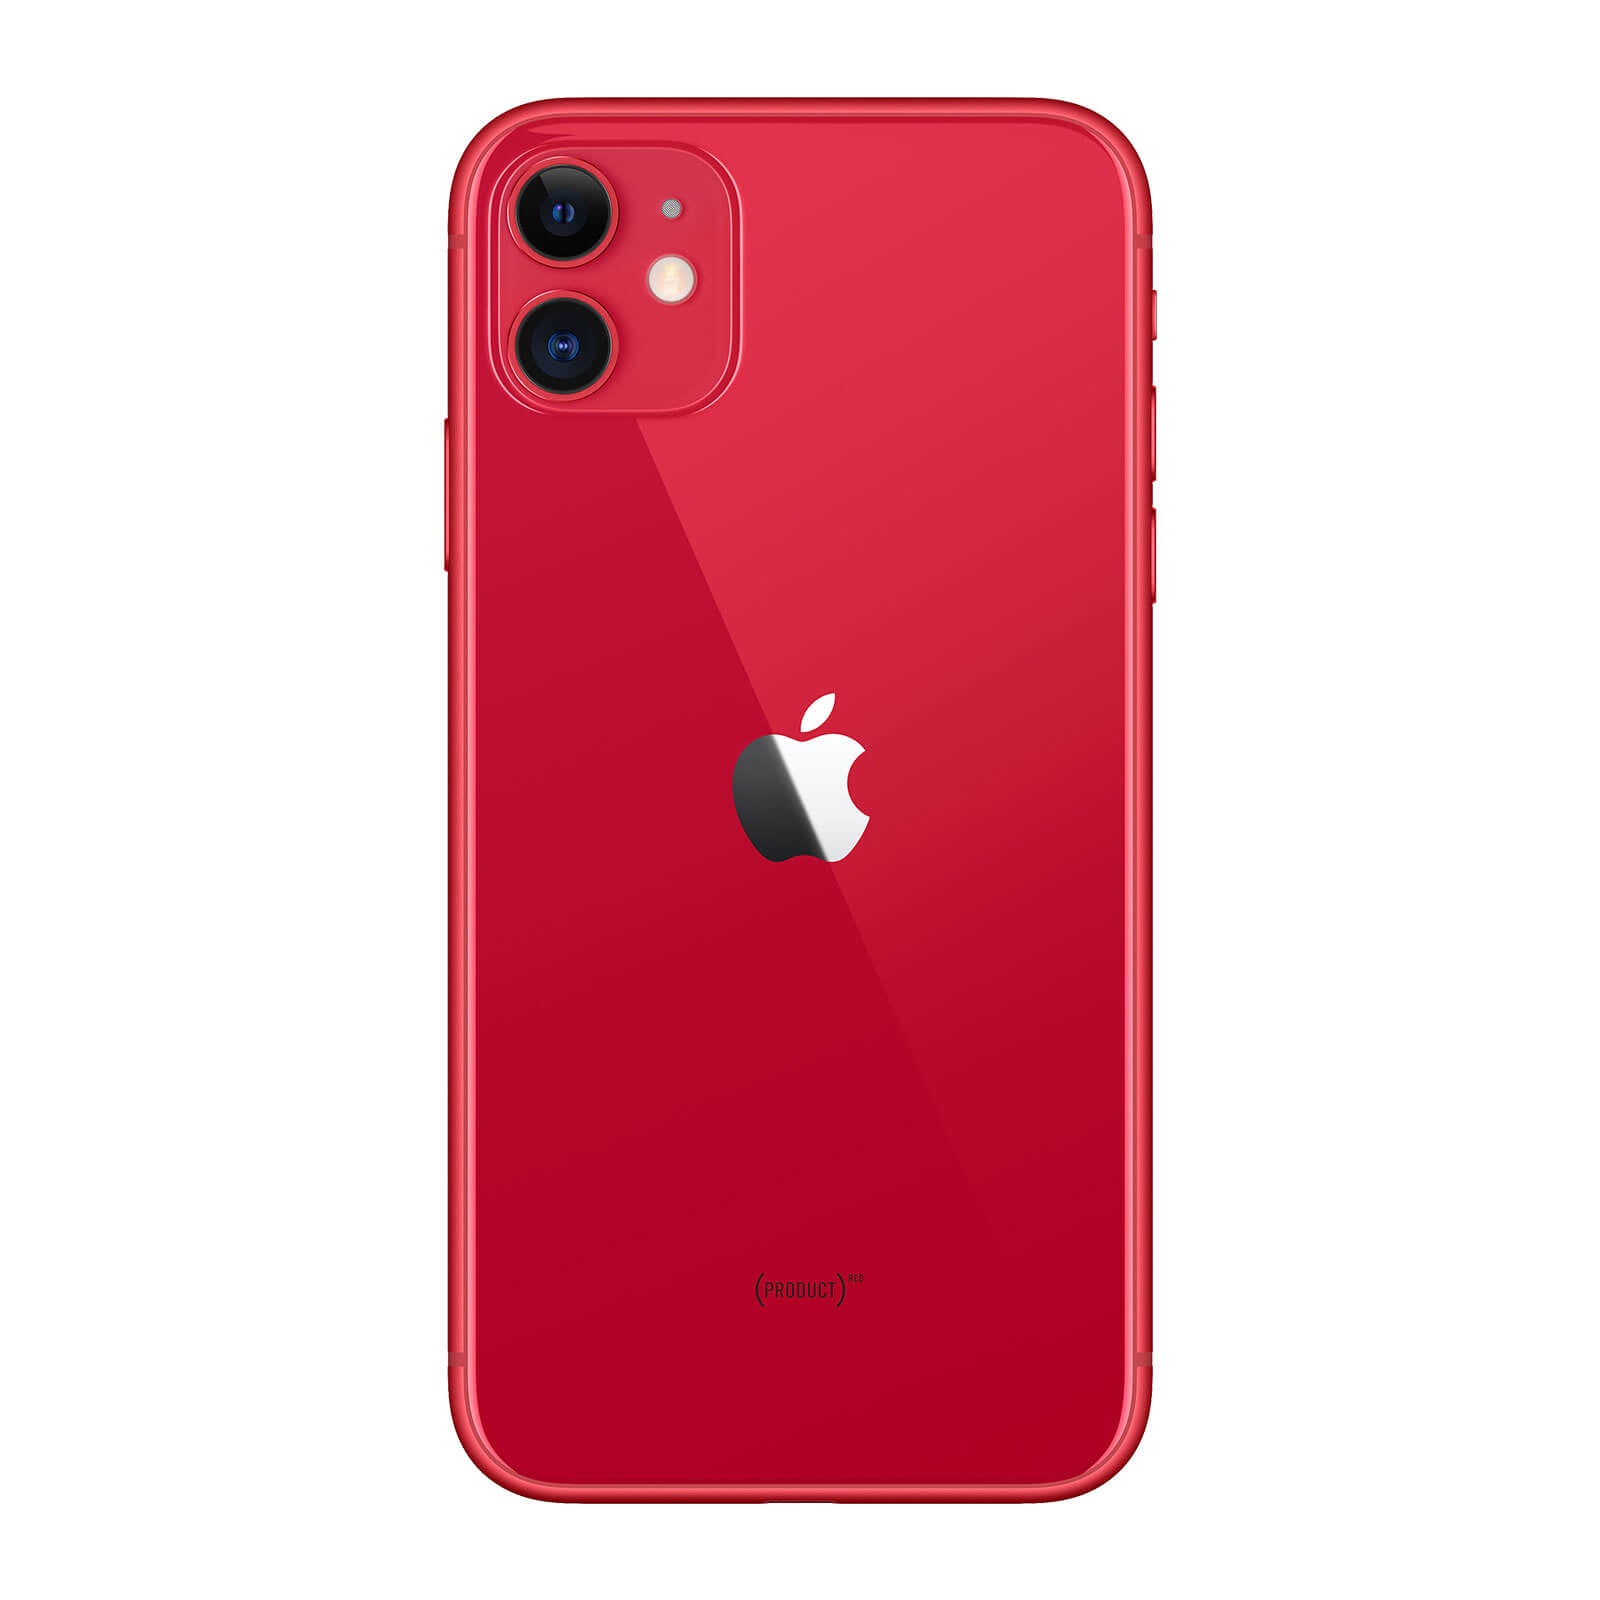 Apple iPhone 11 64GB Product Red Makellos - Ohne Vertrag